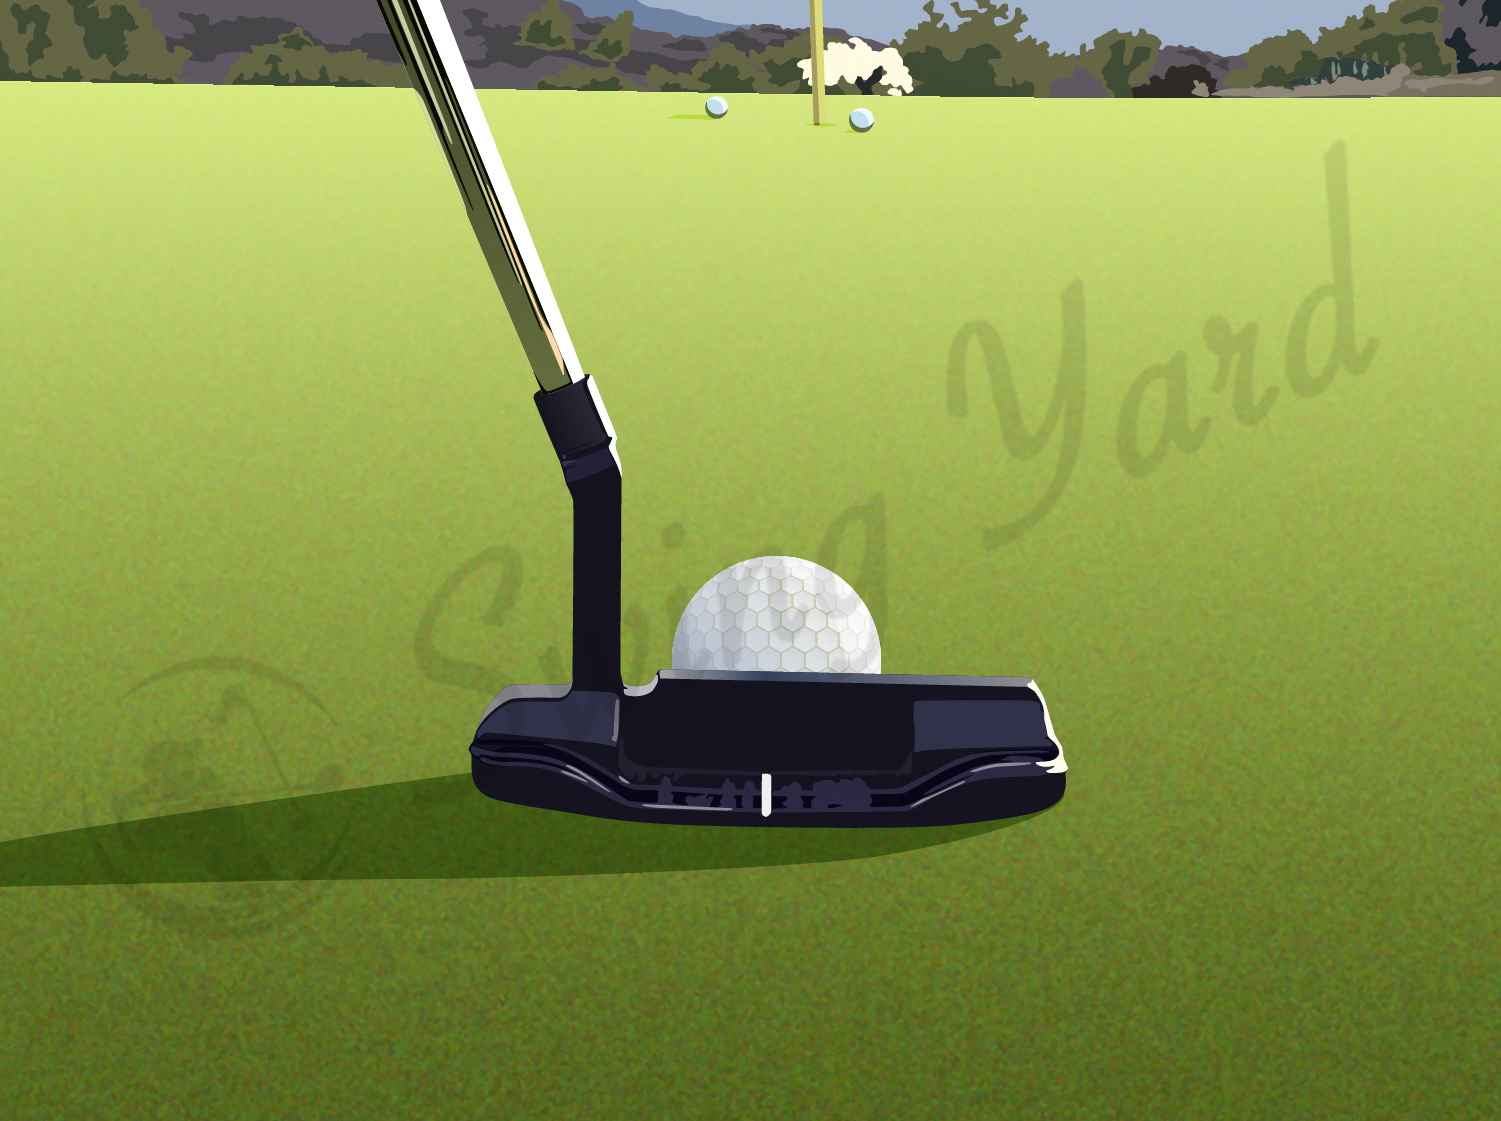 A putter hitting a ball on the green